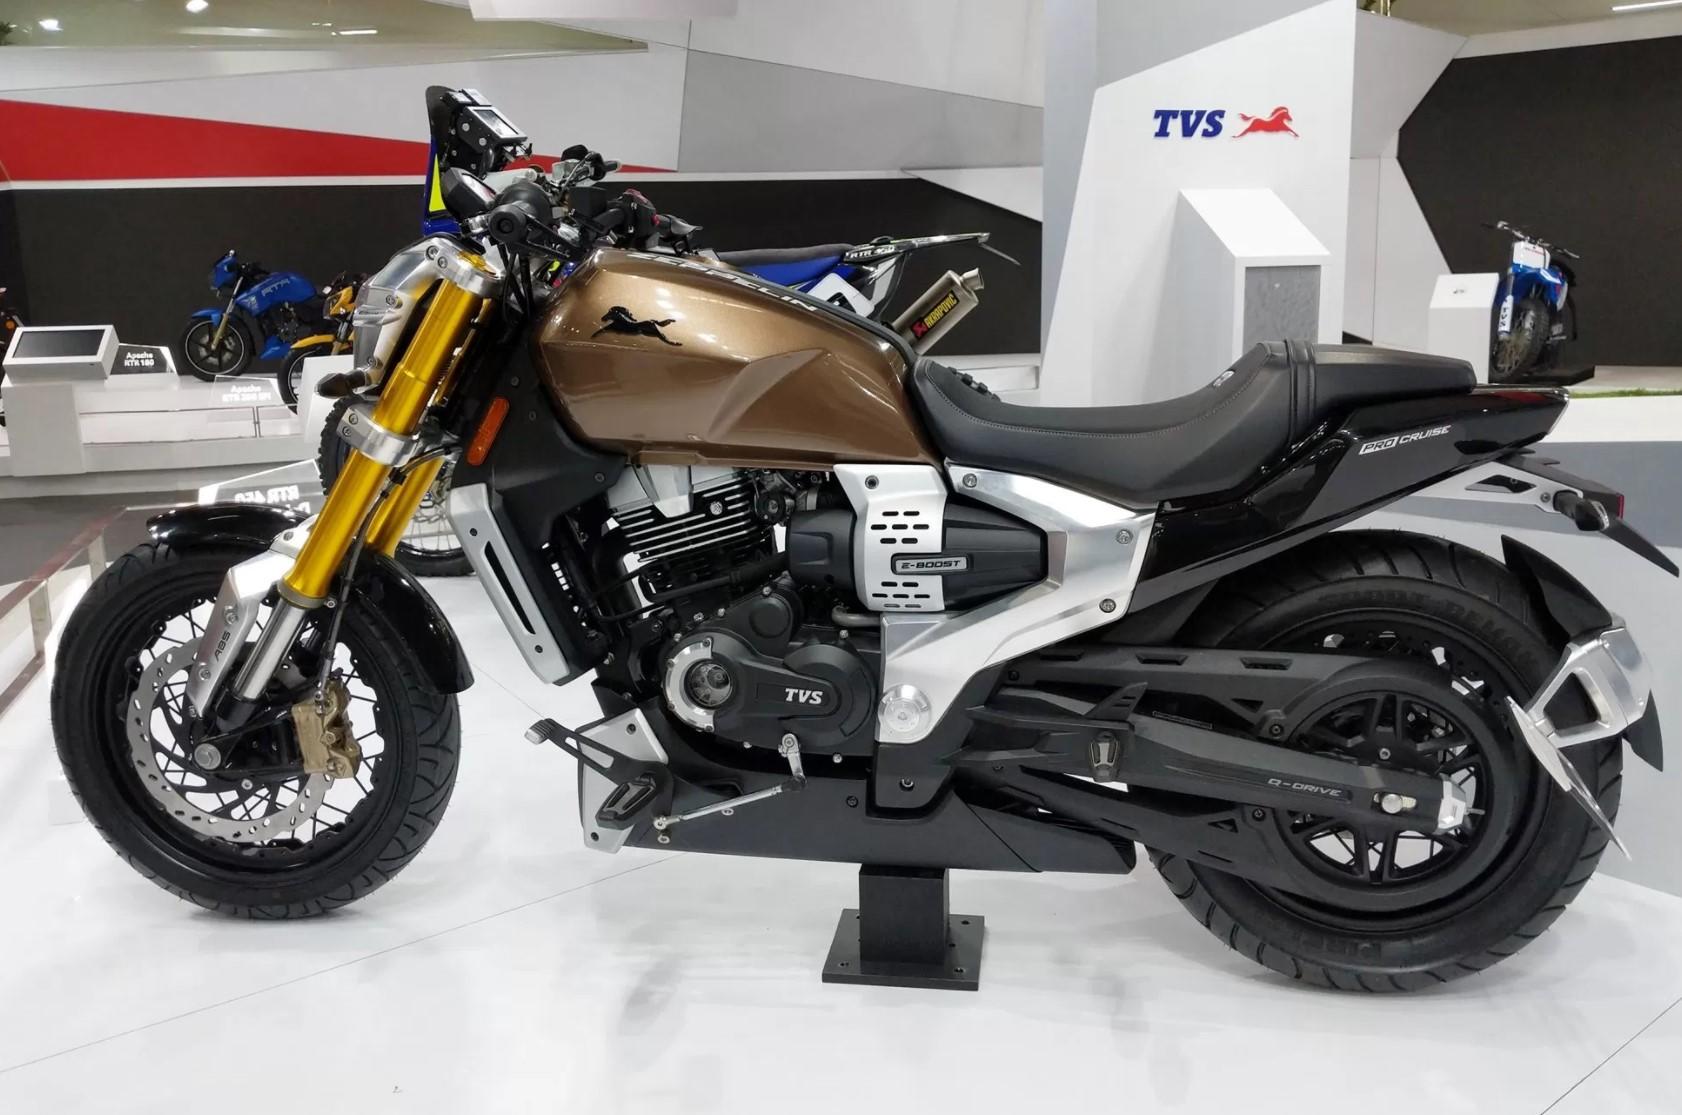 The company sold 106,062 motorcycles in July 2020 as against 108,210 units in July 2019.